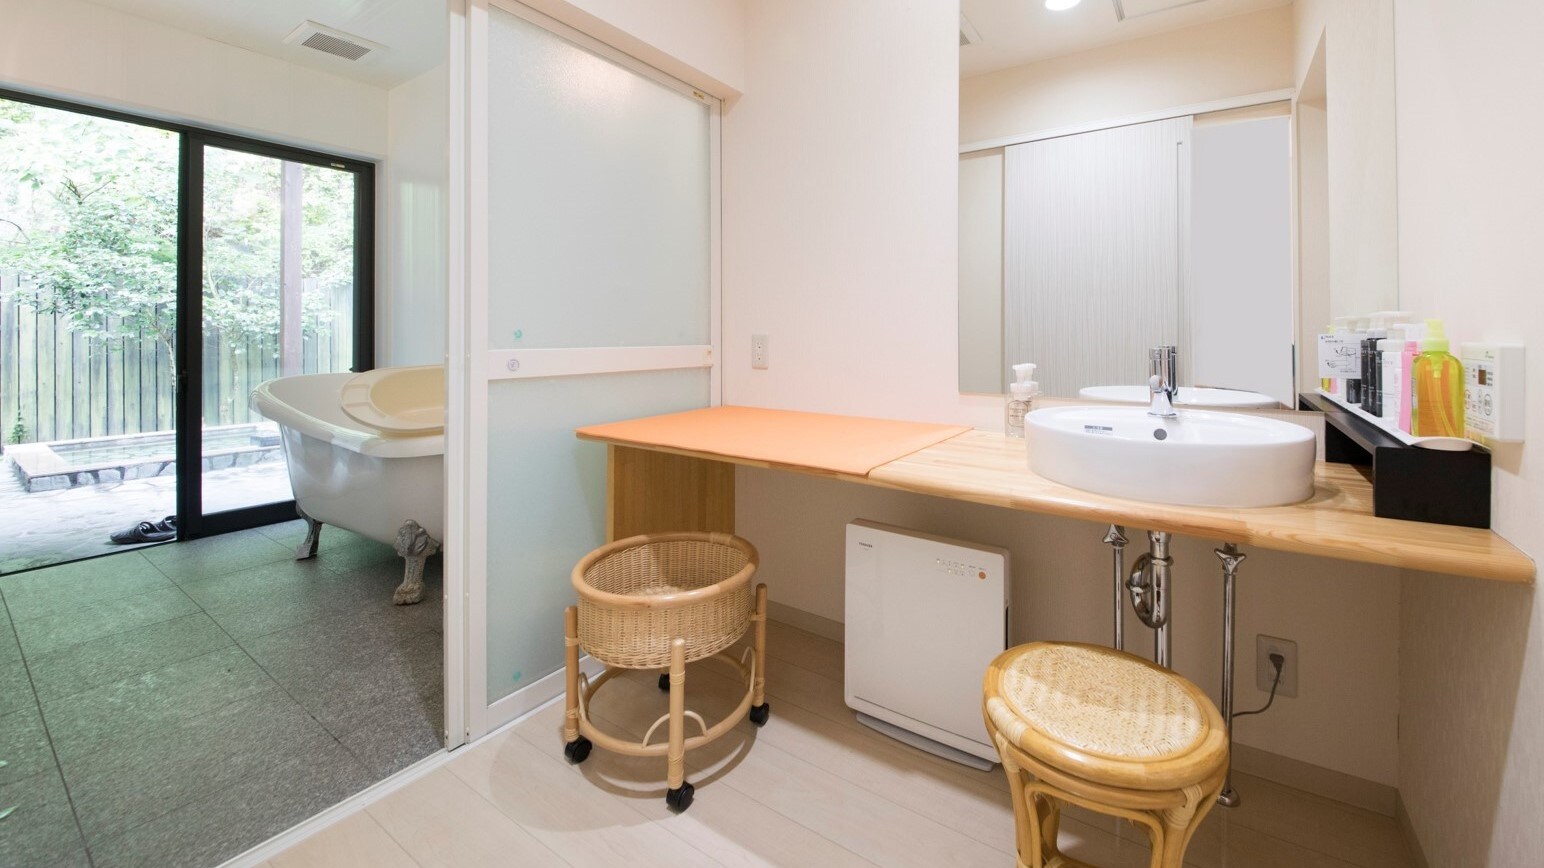 ■ Each room has a spacious and easy-to-use washbasin